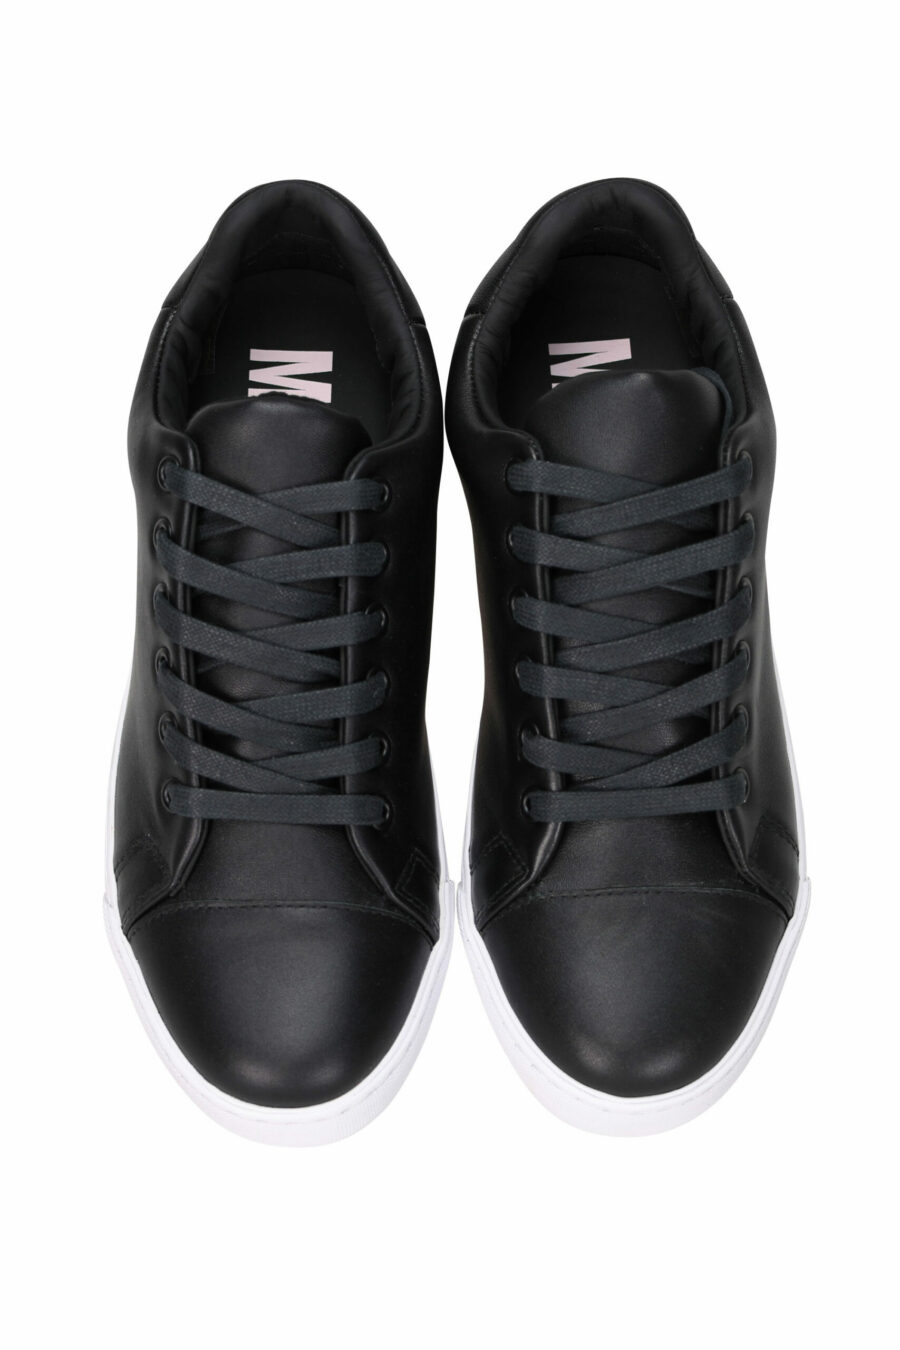 Black trainers "vulc25" with white sole and rubber logo on the back - 8054388585958 3 scaled